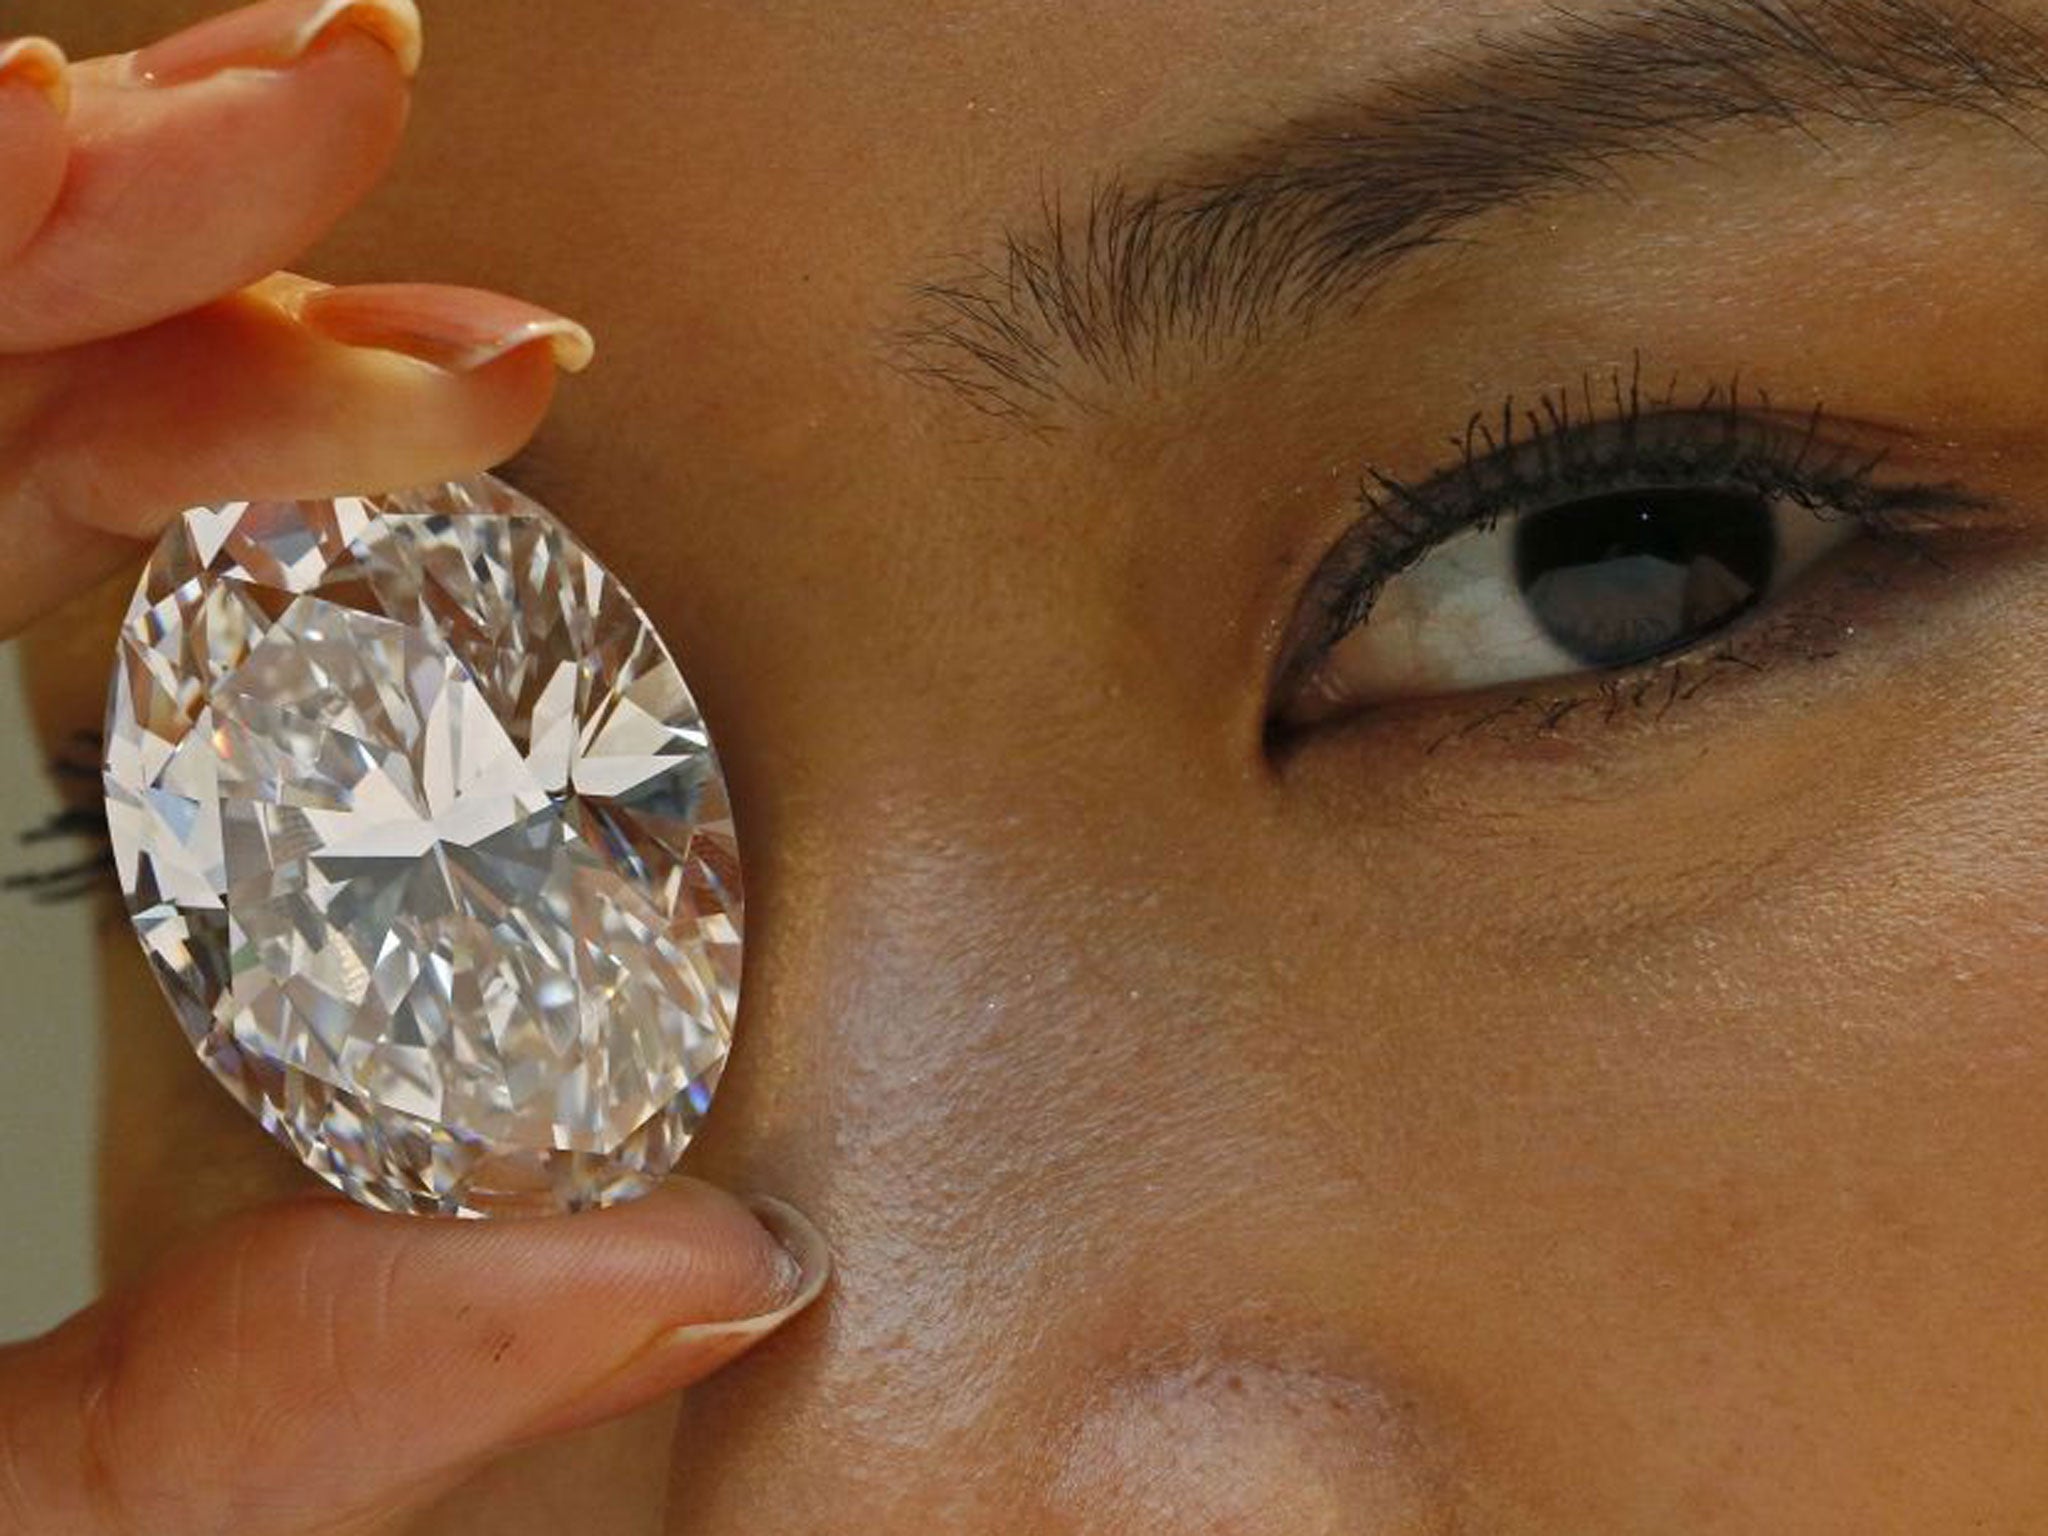 A White diamond has fetched a record $30.6 million at a Sotheby's auction in Hong Kong